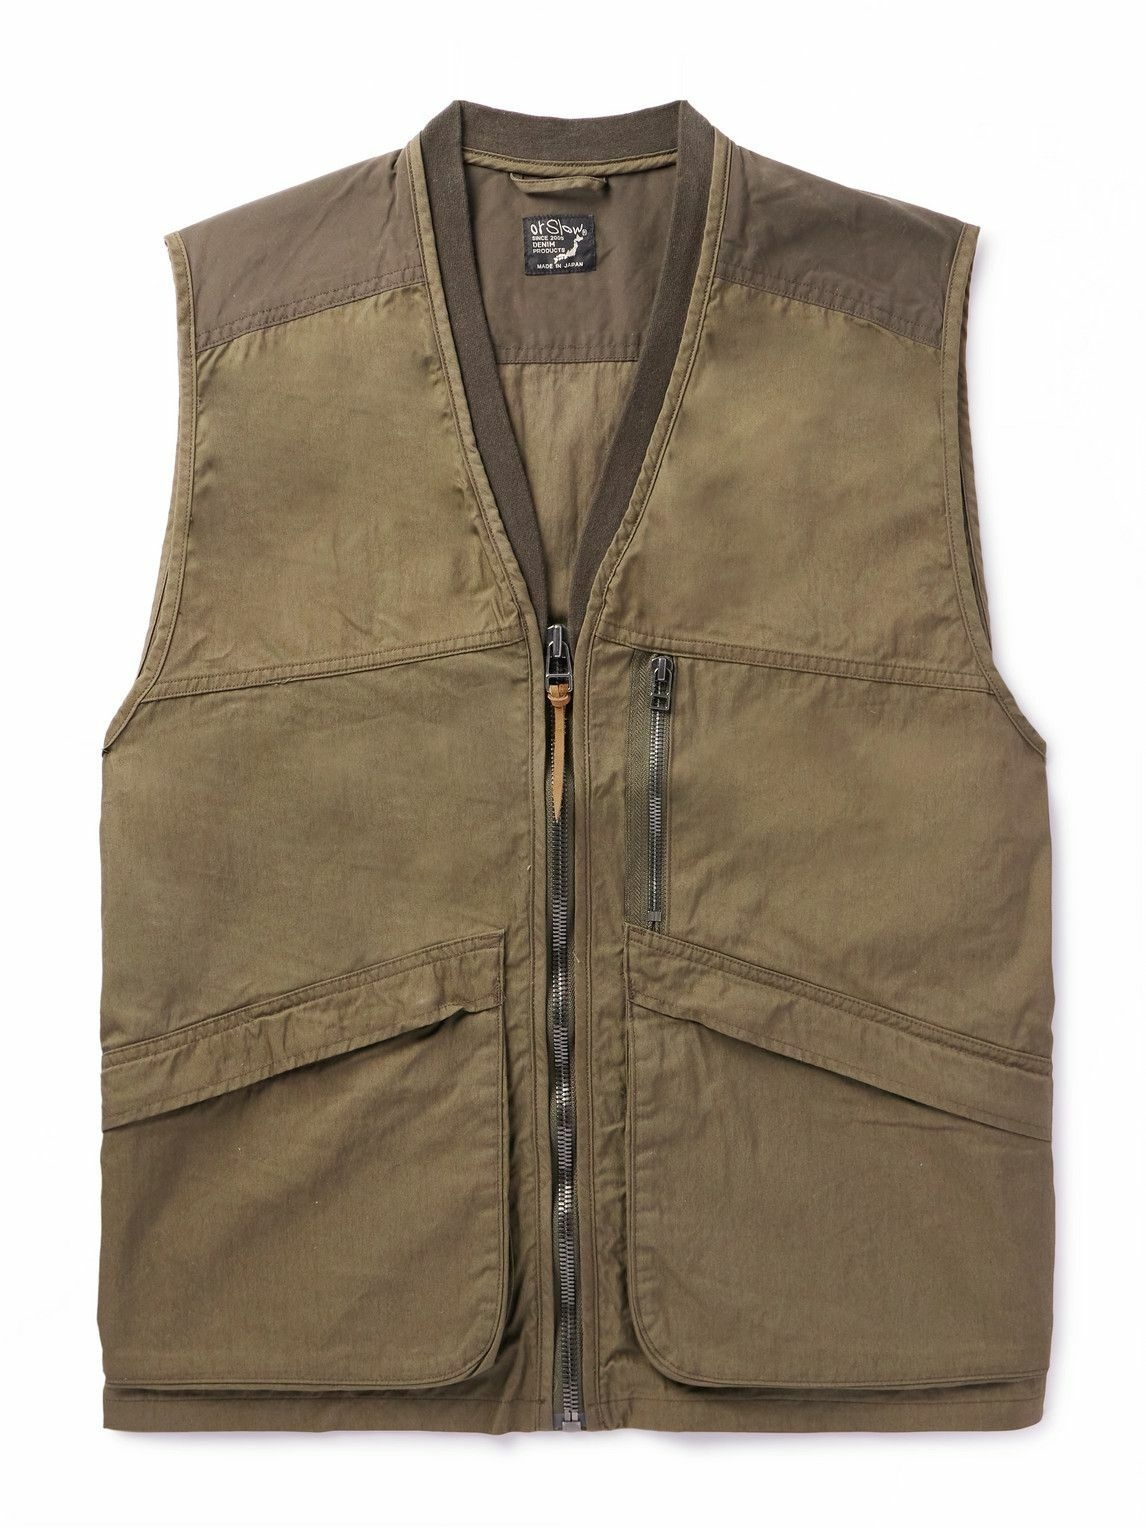 OrSlow - Cotton-Blend Twill Gilet - Green orSlow